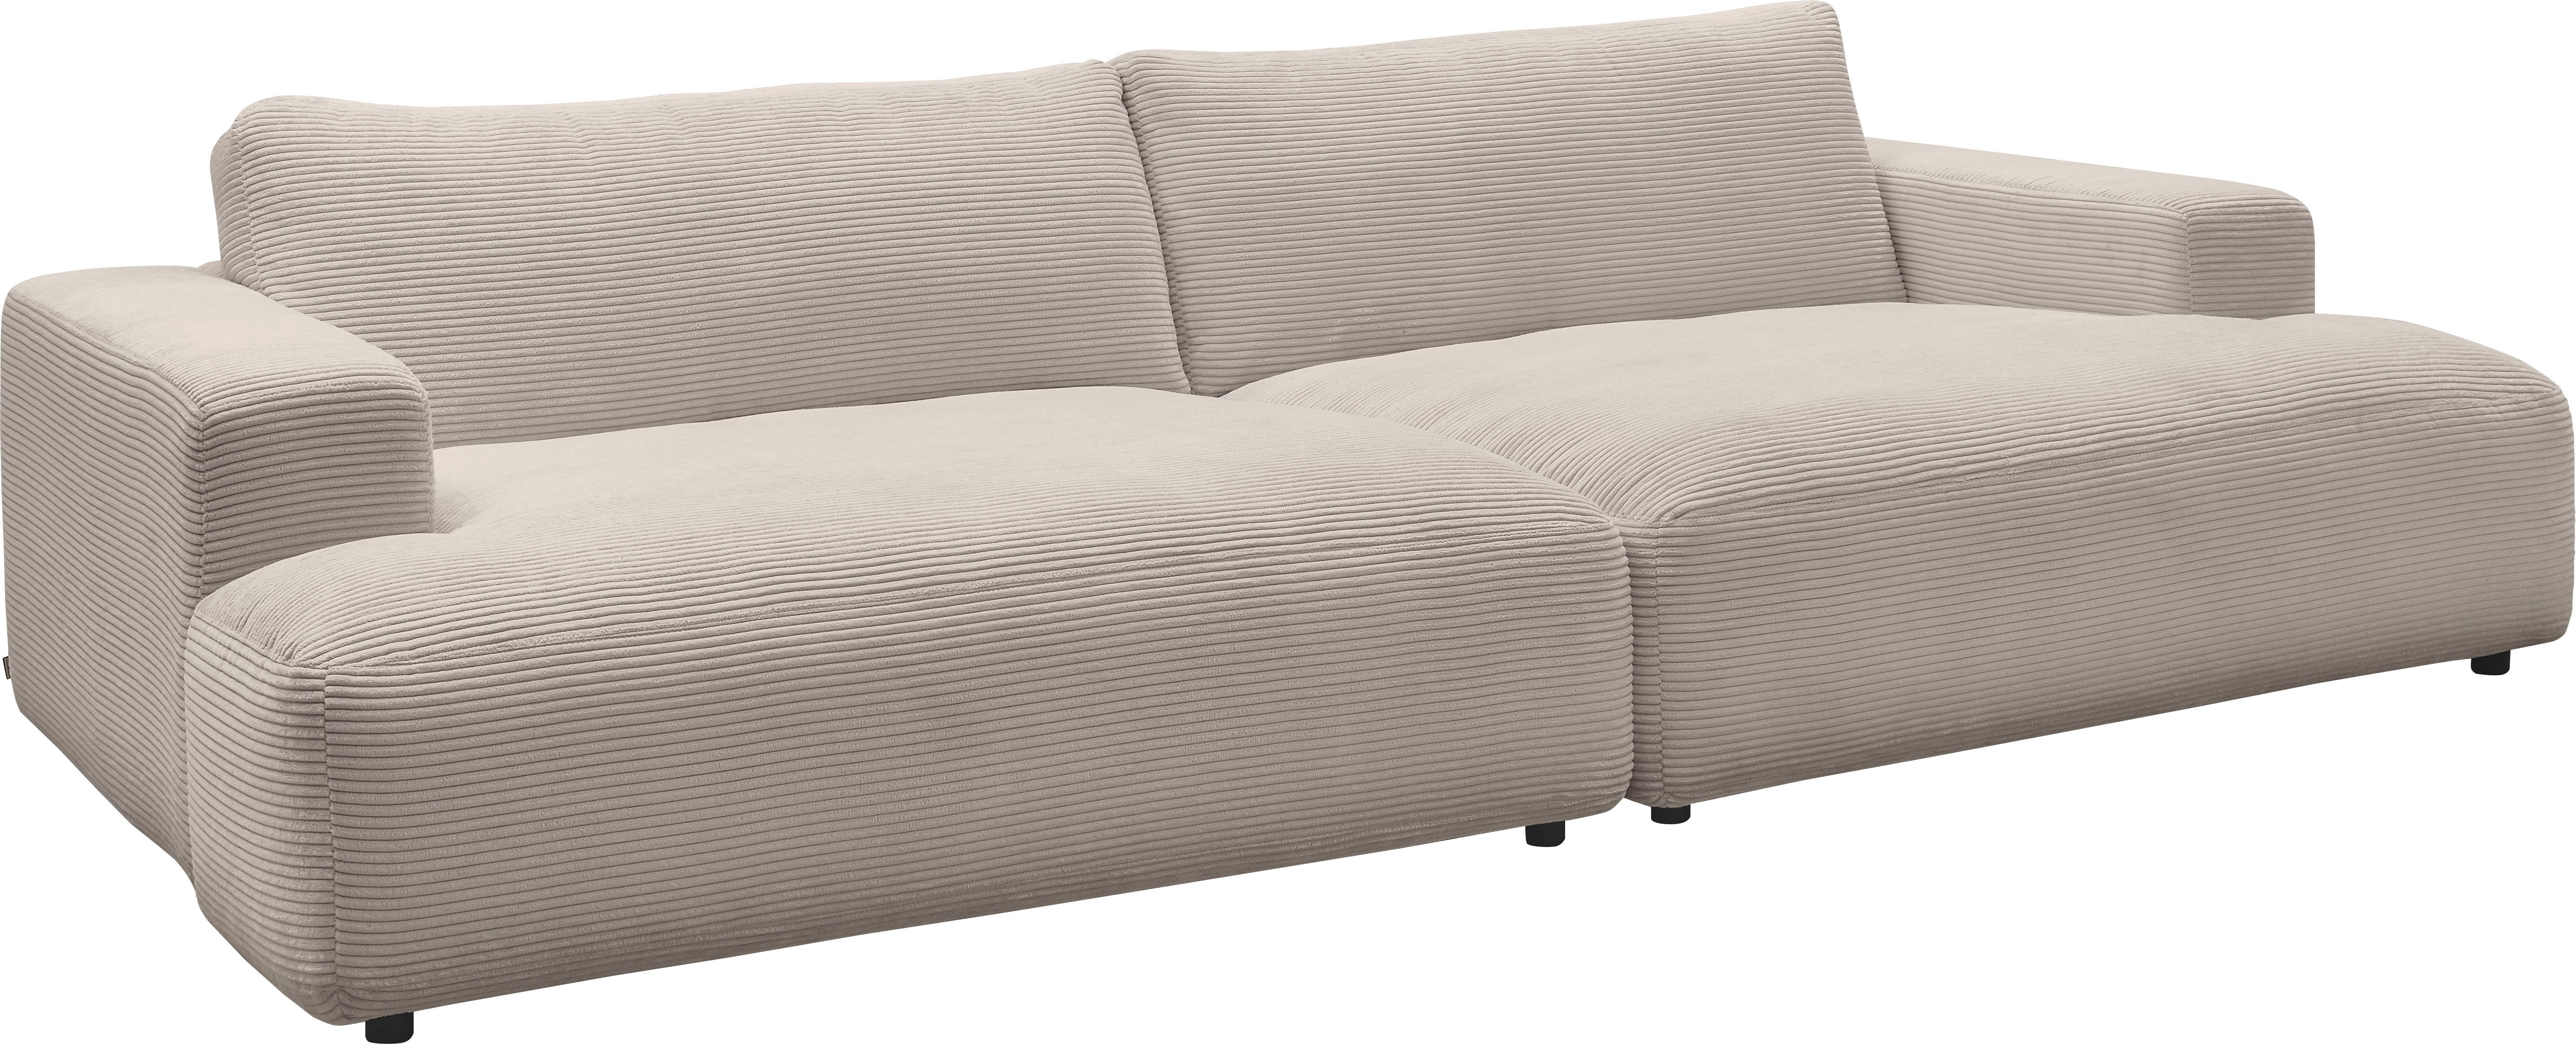 GALLERY M branded by Cord-Bezug, 292 Lucia, cm light-grey Breite Loungesofa Musterring